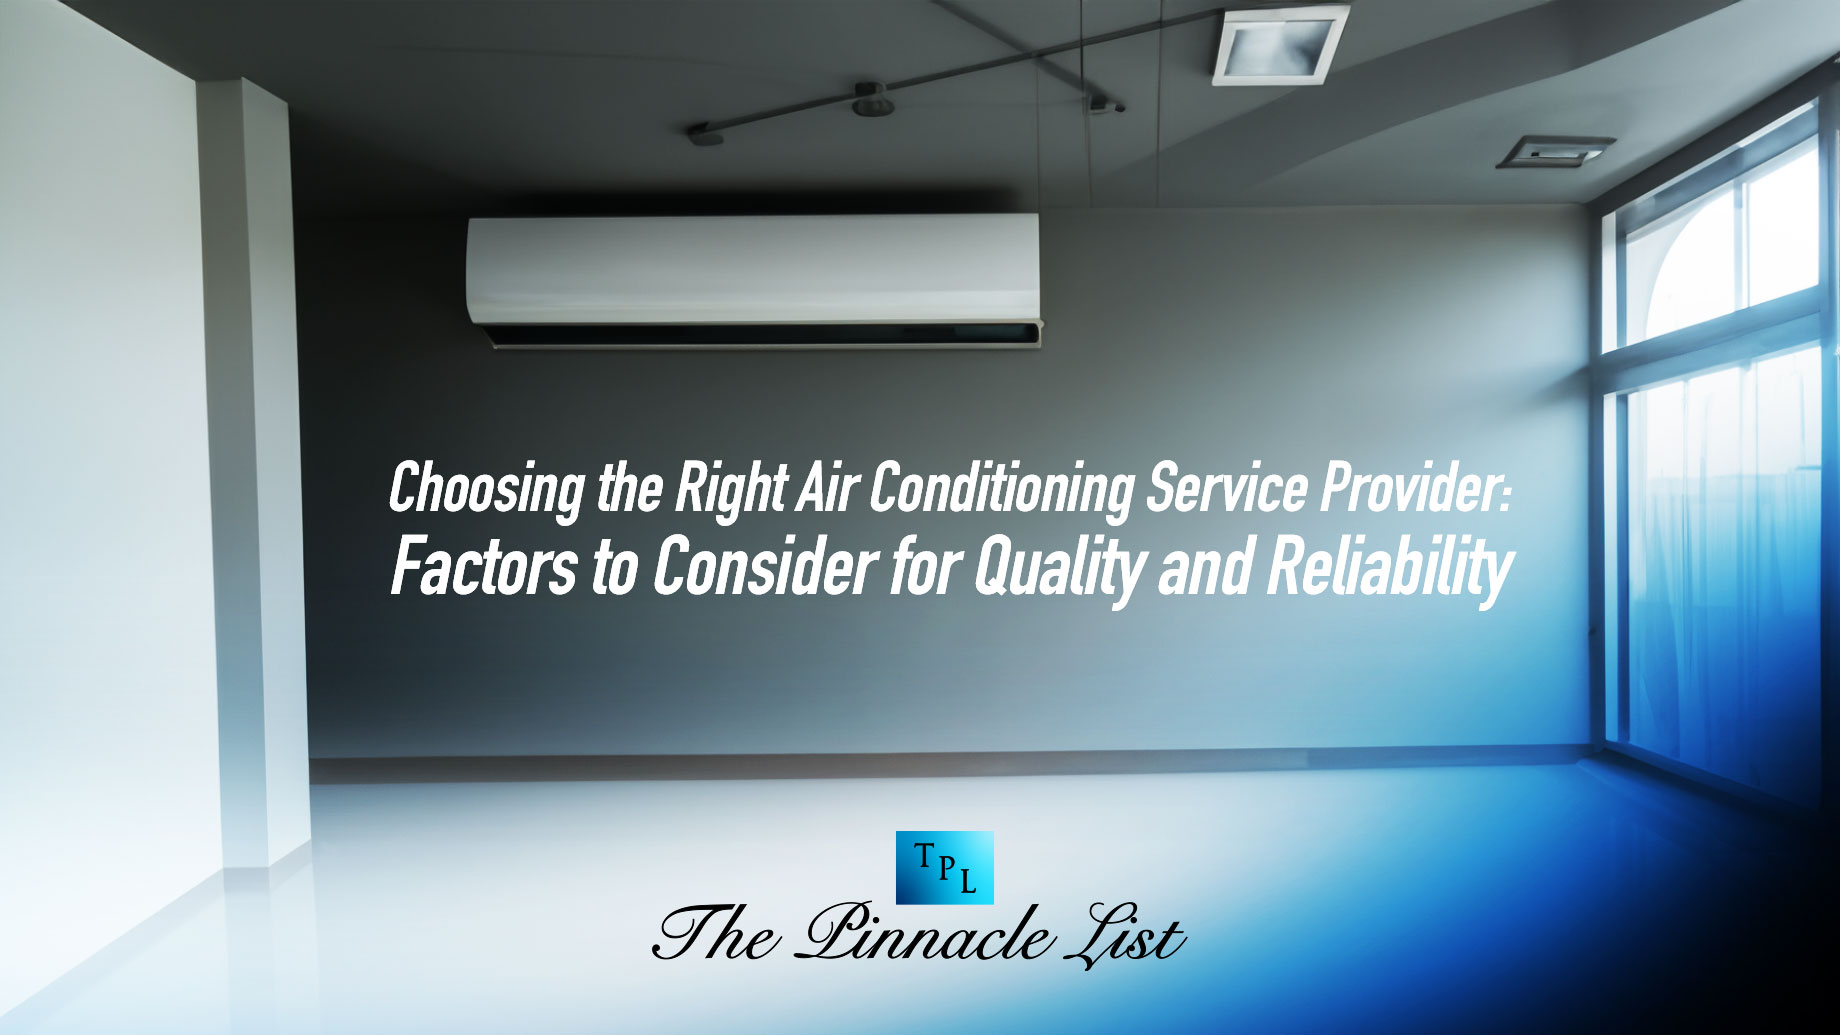 Choosing the Right Air Conditioning Service Provider: Factors to Consider for Quality and Reliability